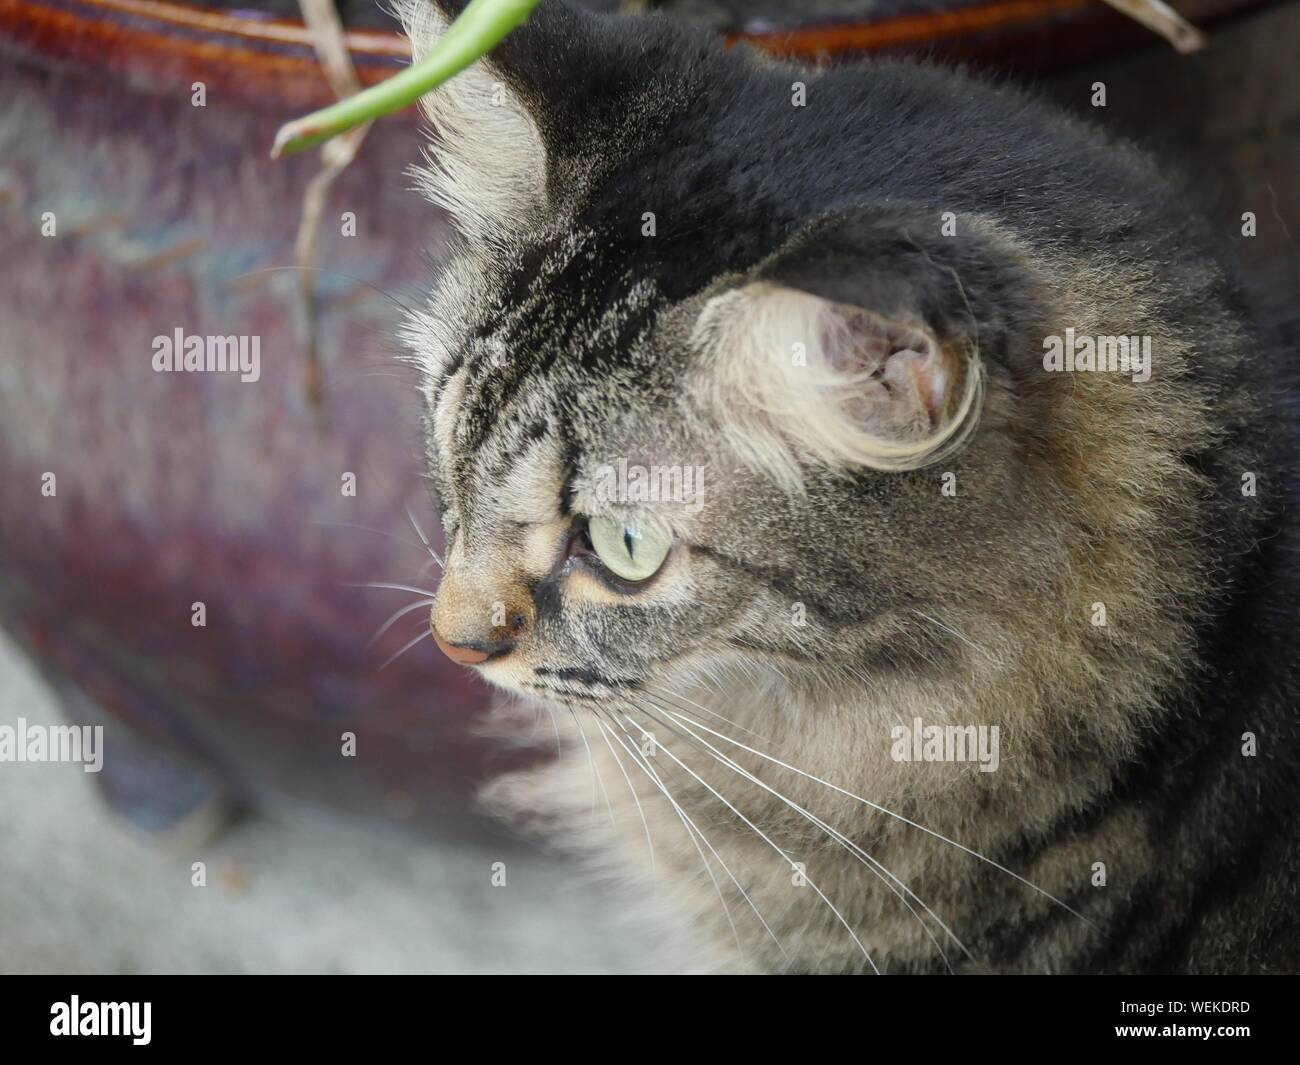 One of the pampered tabby cats at the Hemingway house in Key West, Florida. Stock Photo